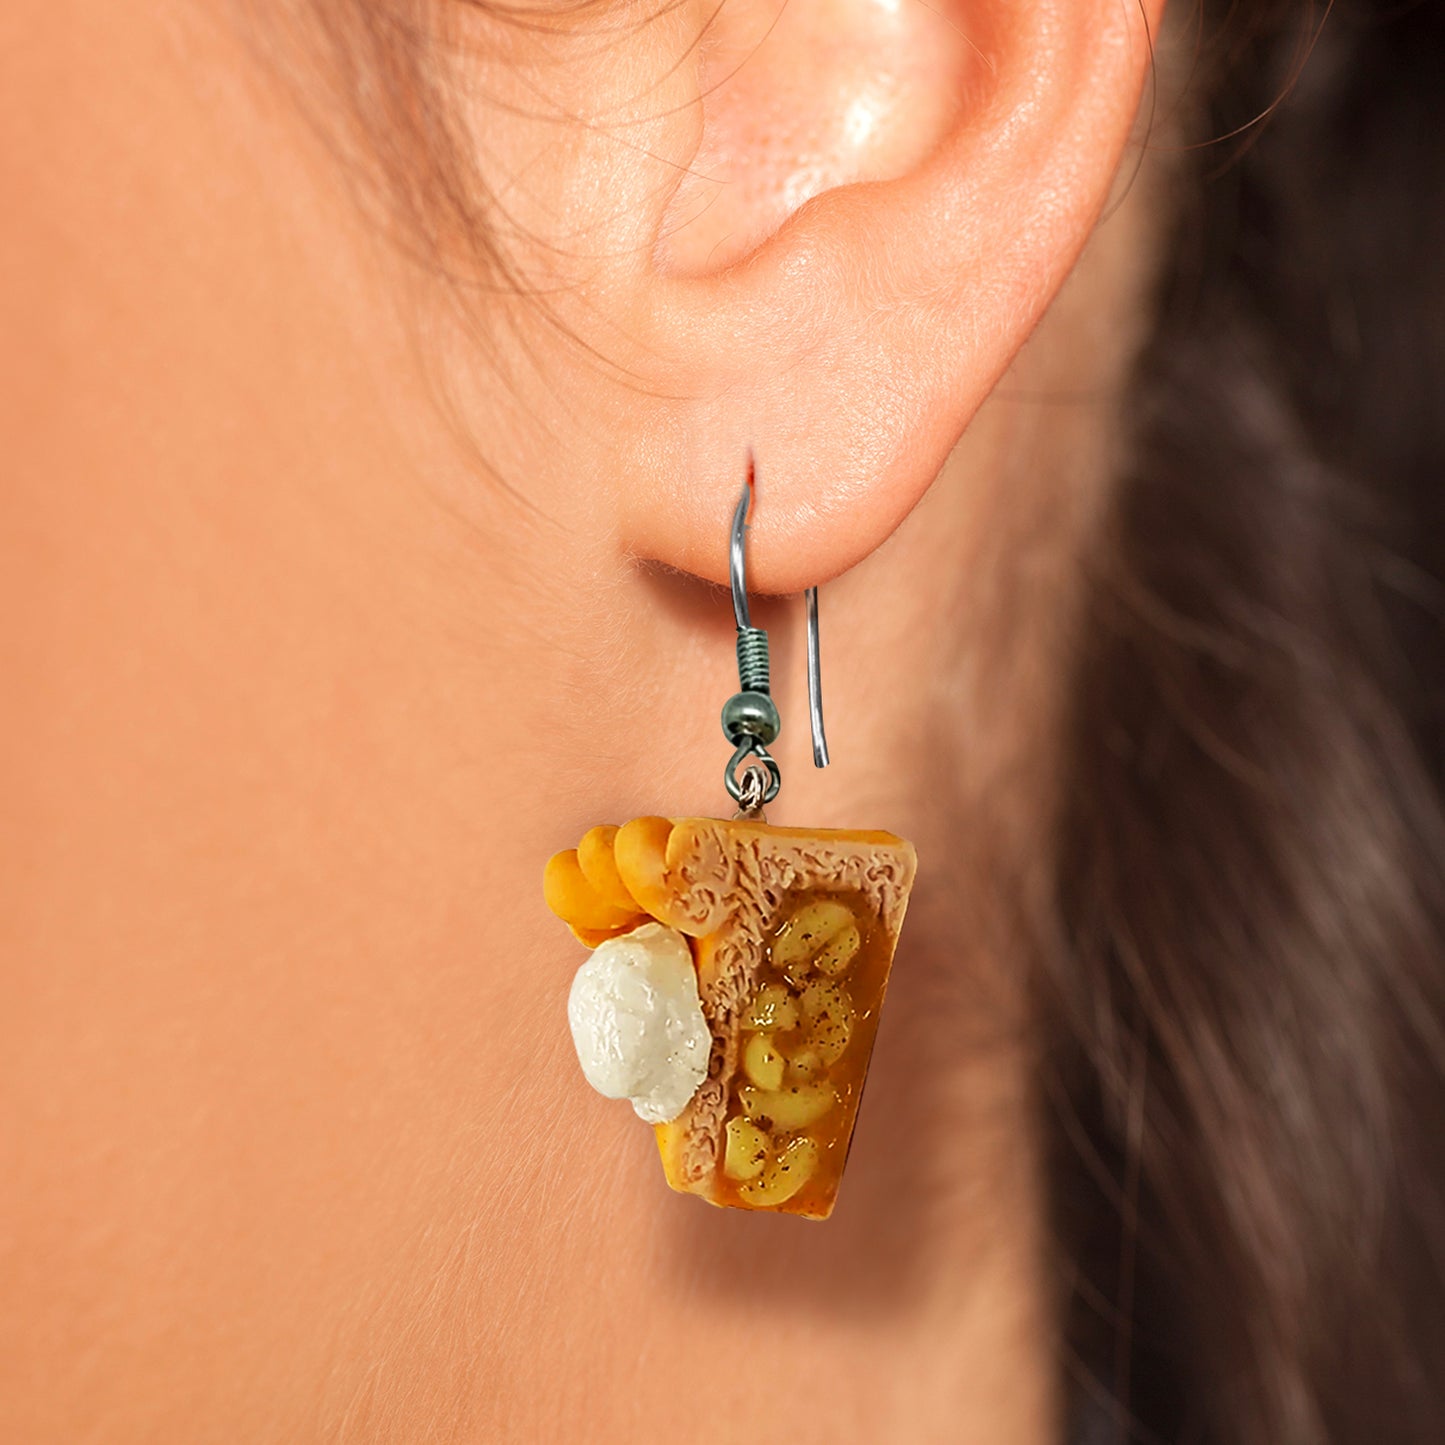 A close-up of a woman's ear. She is wearing a pair of small, clay earrings in the shape of apple pie slices. You can see the "apple filling" from the side of the earring, and there is a scoop of ice cream on top. The earrings are on a set of silver earring hooks.